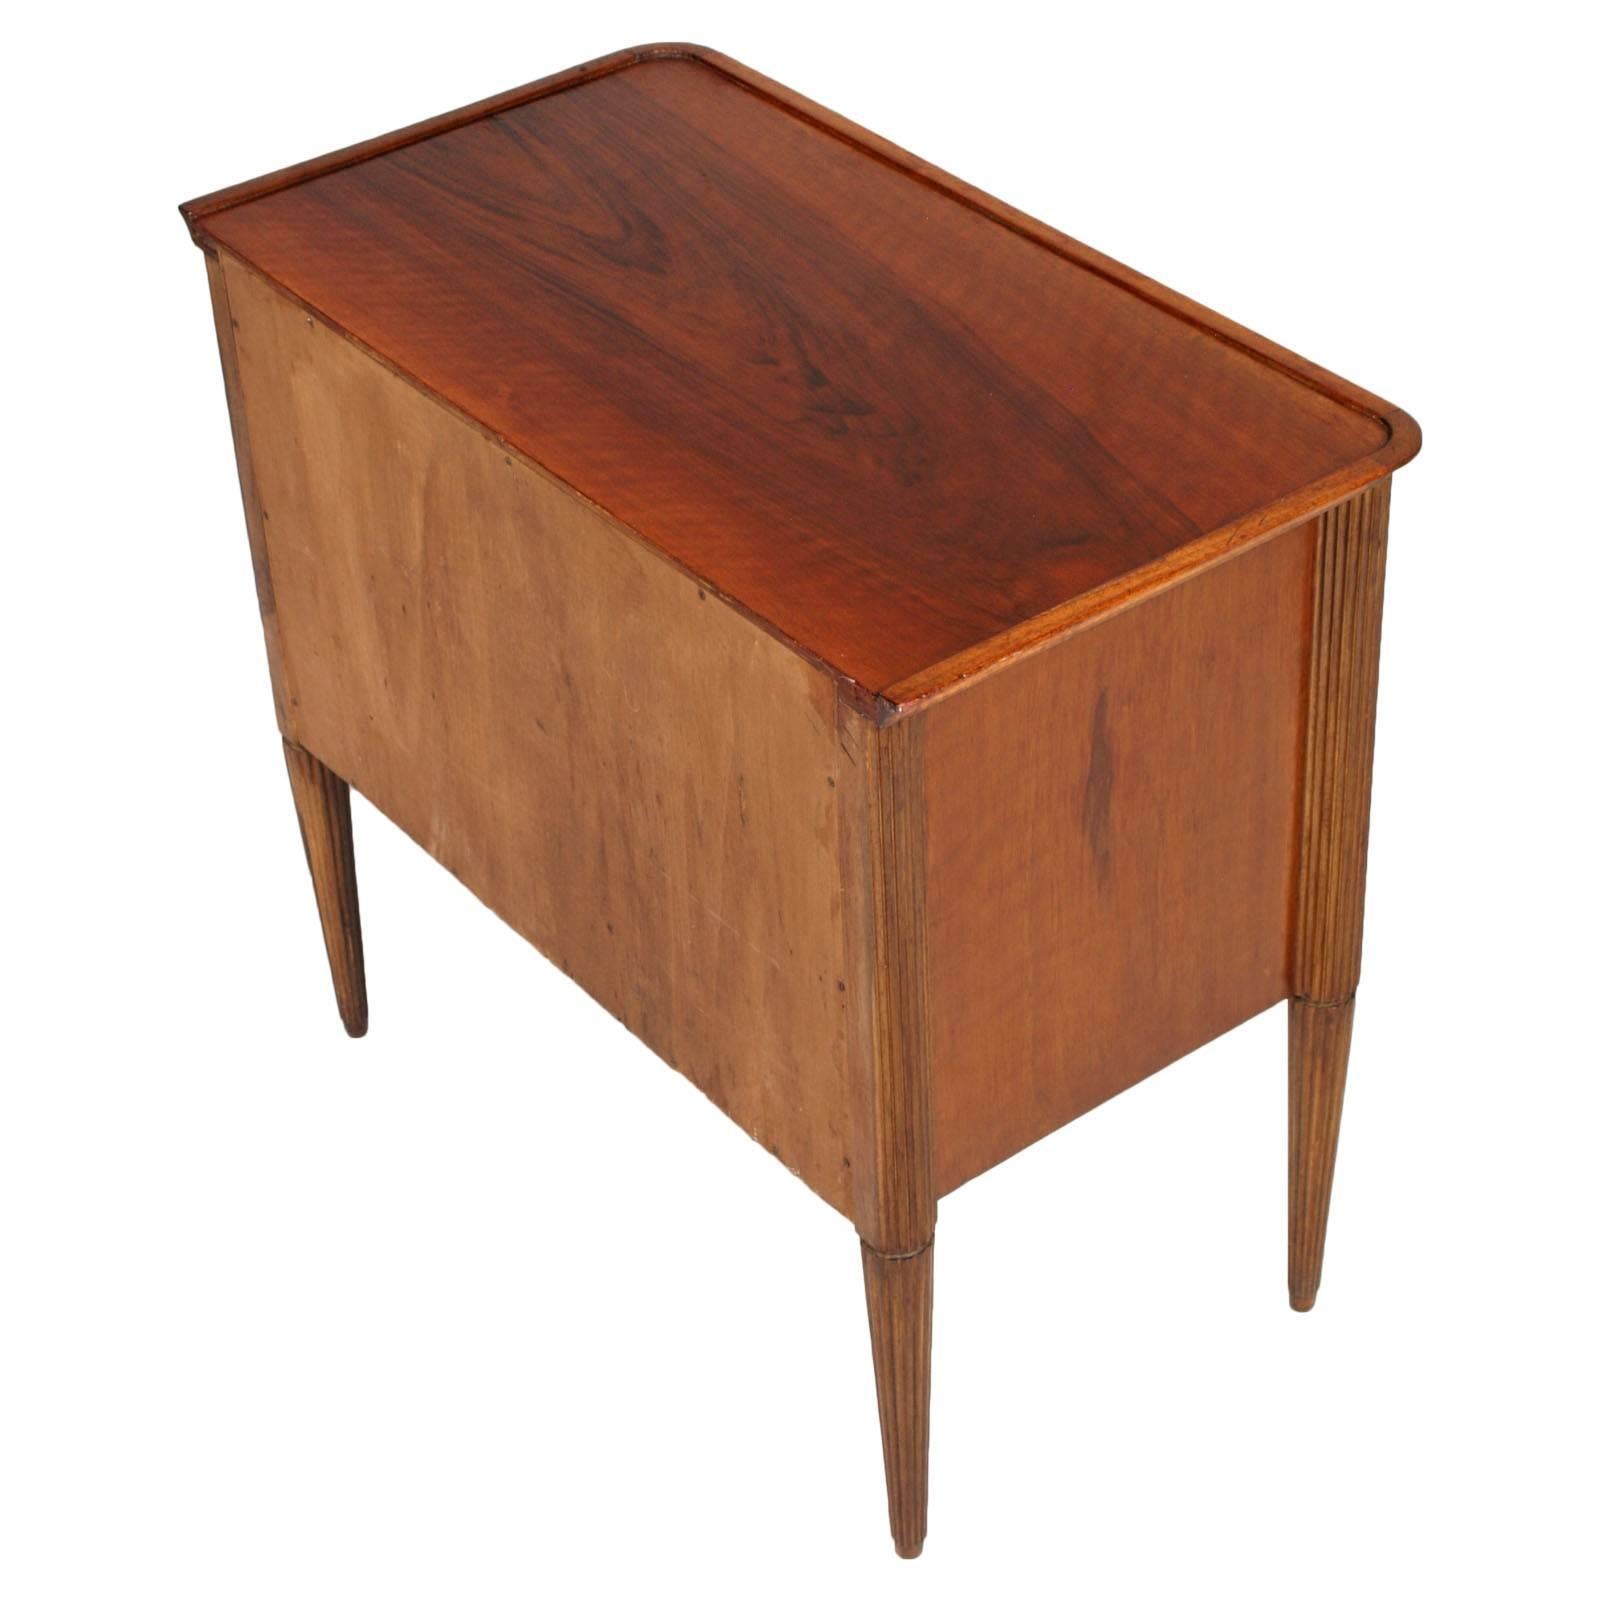 20th Century Pair of Italy Bedside Cabinet Nightstands Midcentury Modern Vittorio Dassi Style